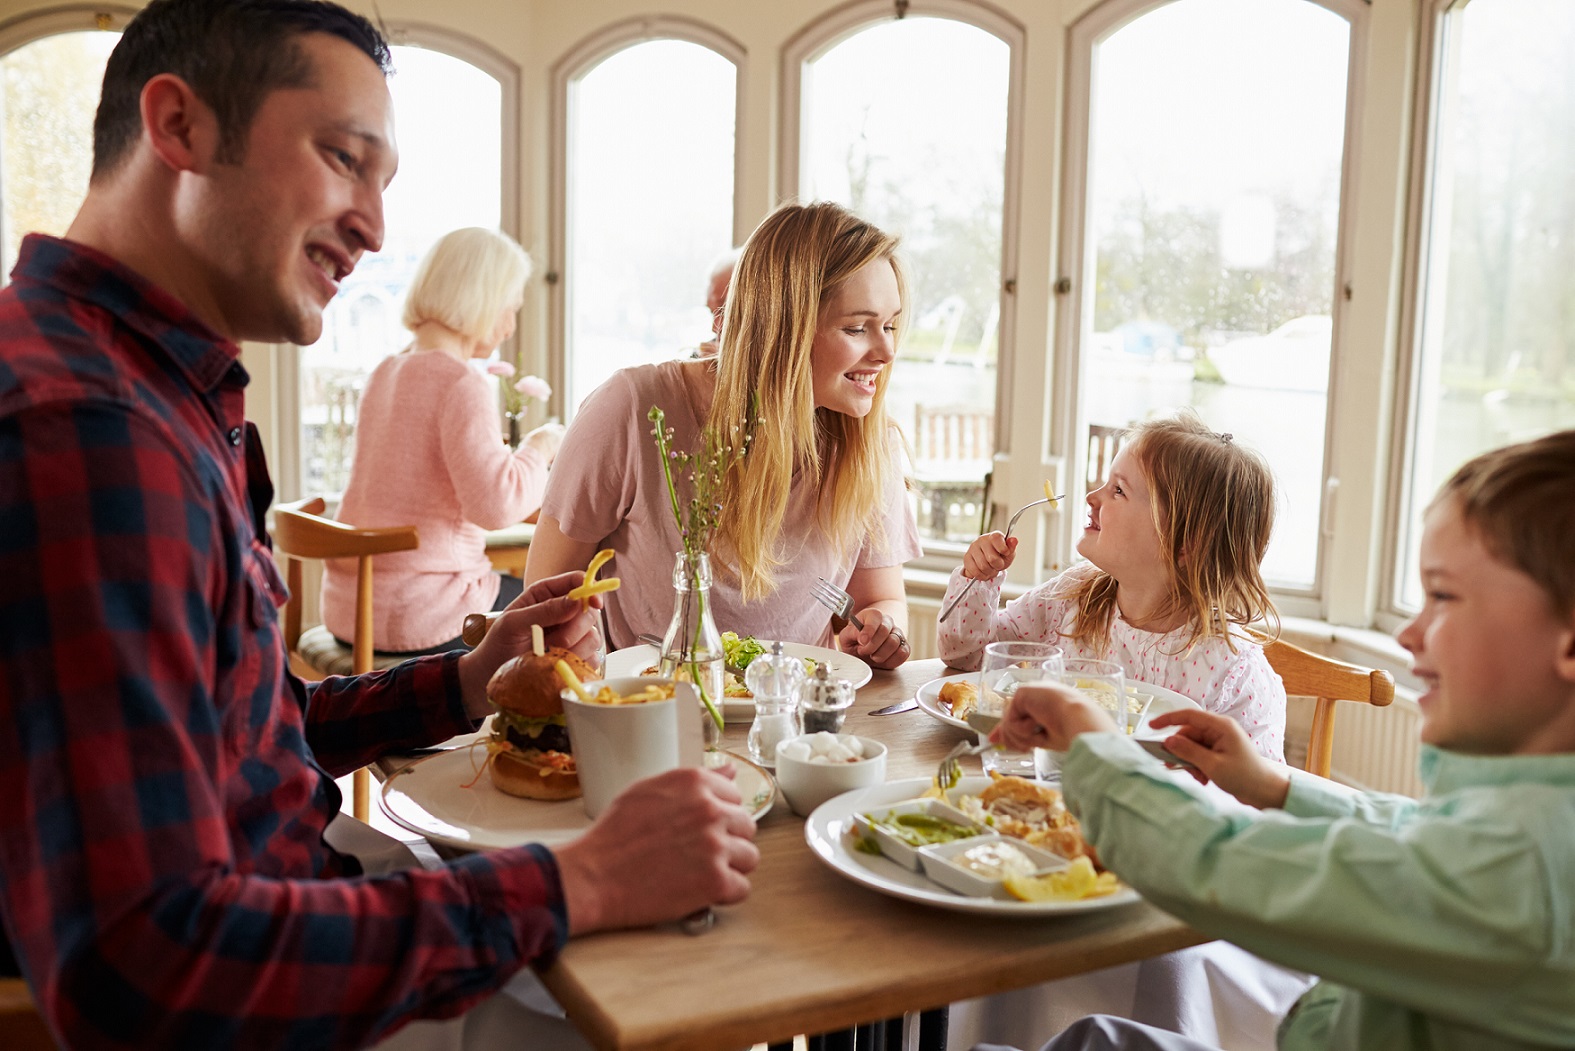 IKC are providing 7 top tips for a family-friendly hotel restaurant